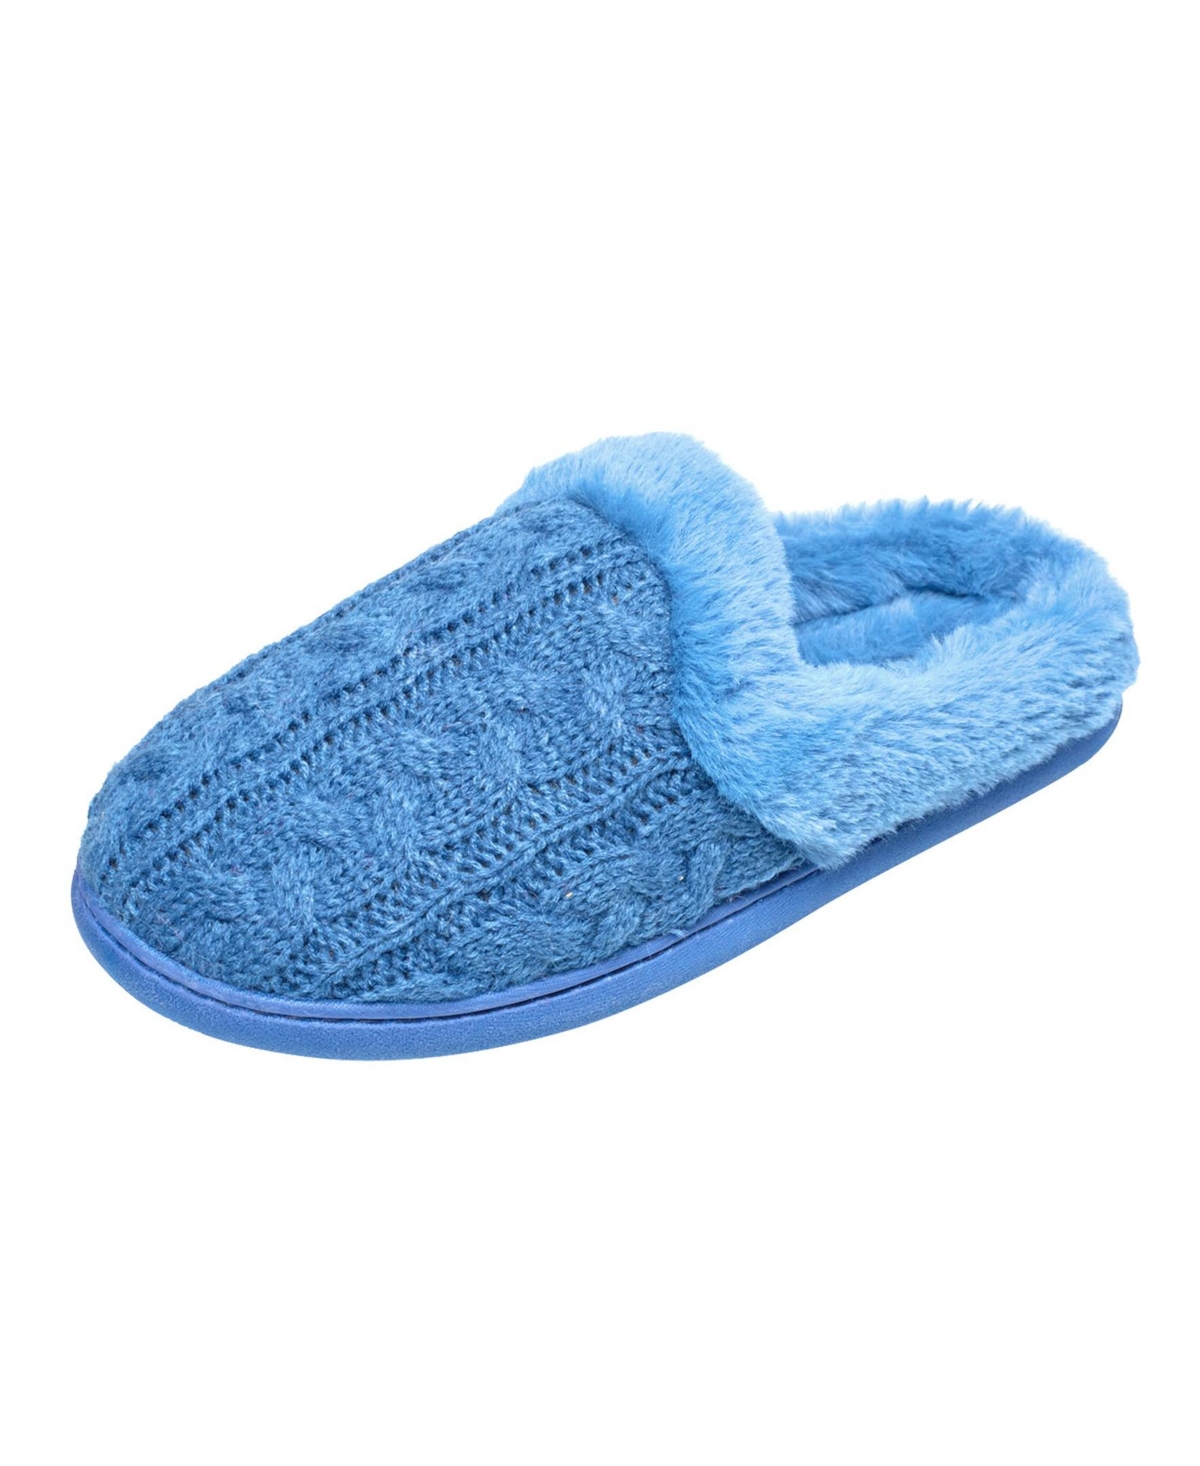 Women's Cable Knit Clog - Teal